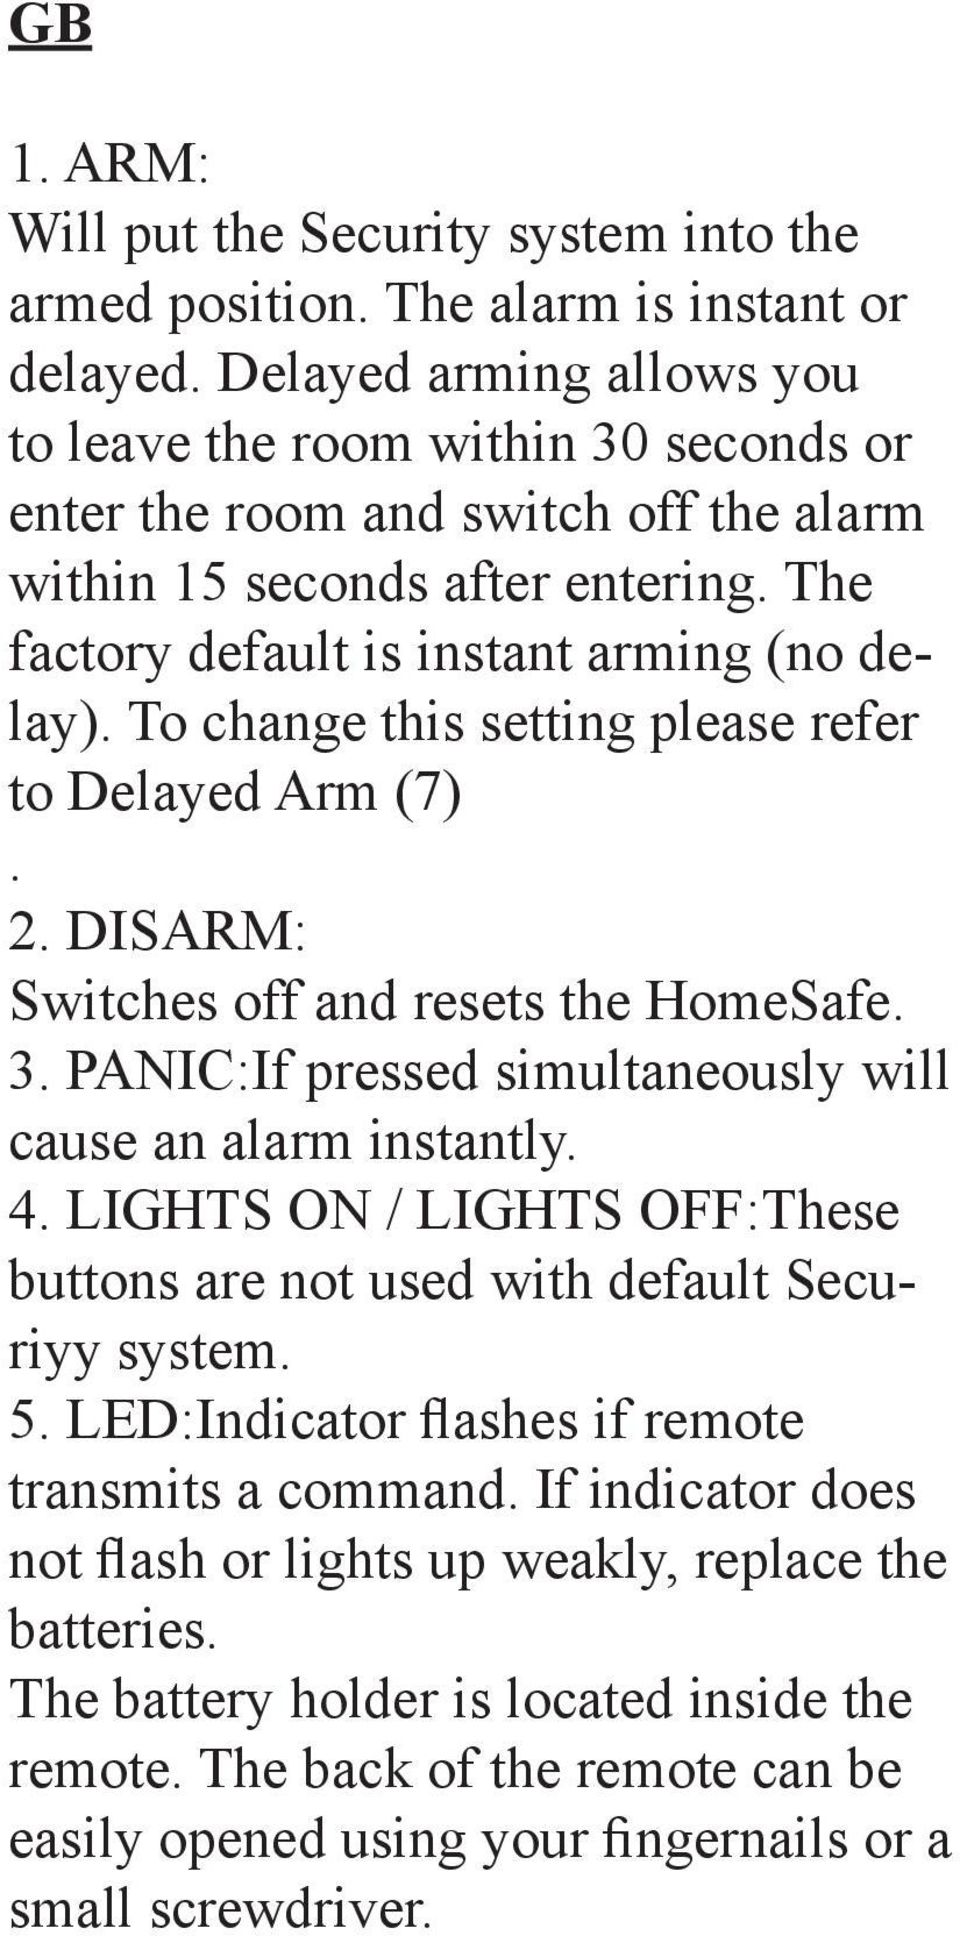 To change this setting please refer to Delayed Arm (7). 2. DISARM: Switches off and resets the HomeSafe. 3. PANIC:If pressed simultaneously will cause an alarm instantly. 4.